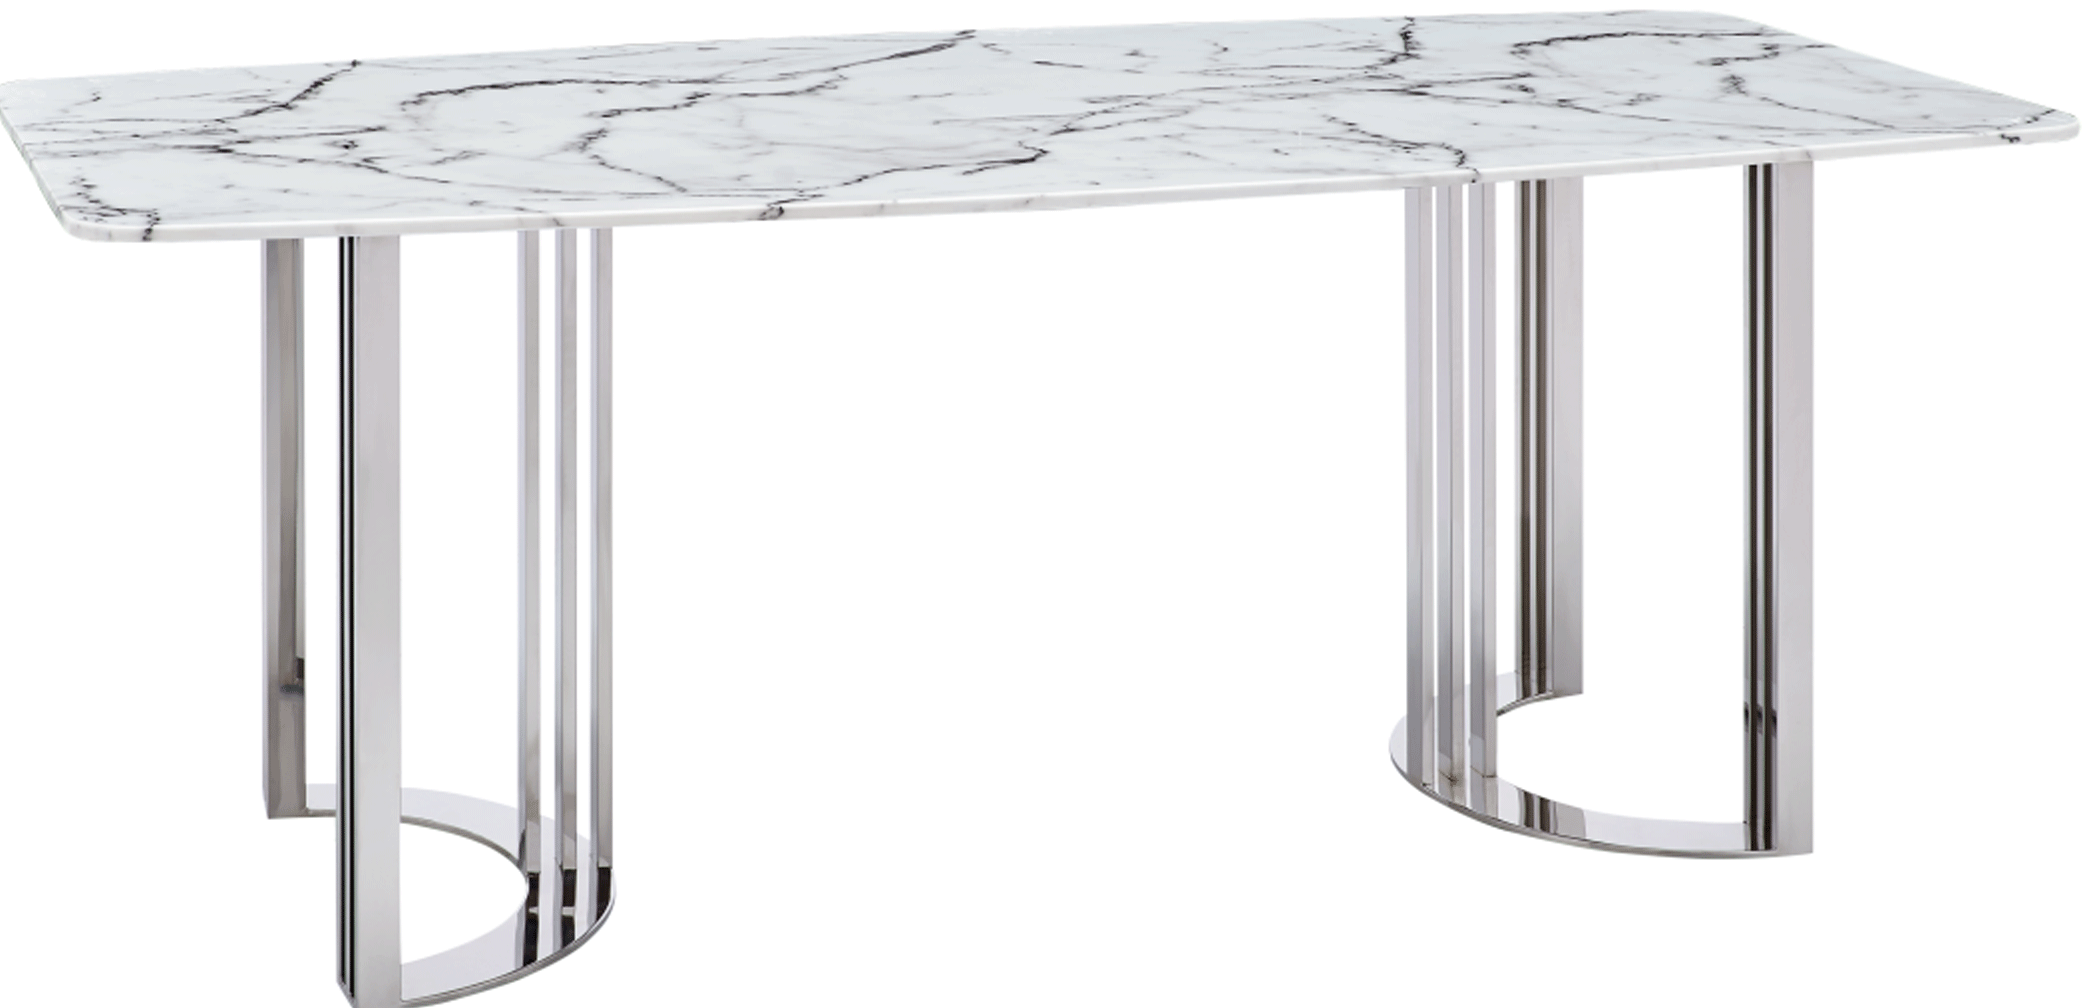 Living Room Furniture Reclining and Sliding Seats Sets 131 Silver Marble Dining Table